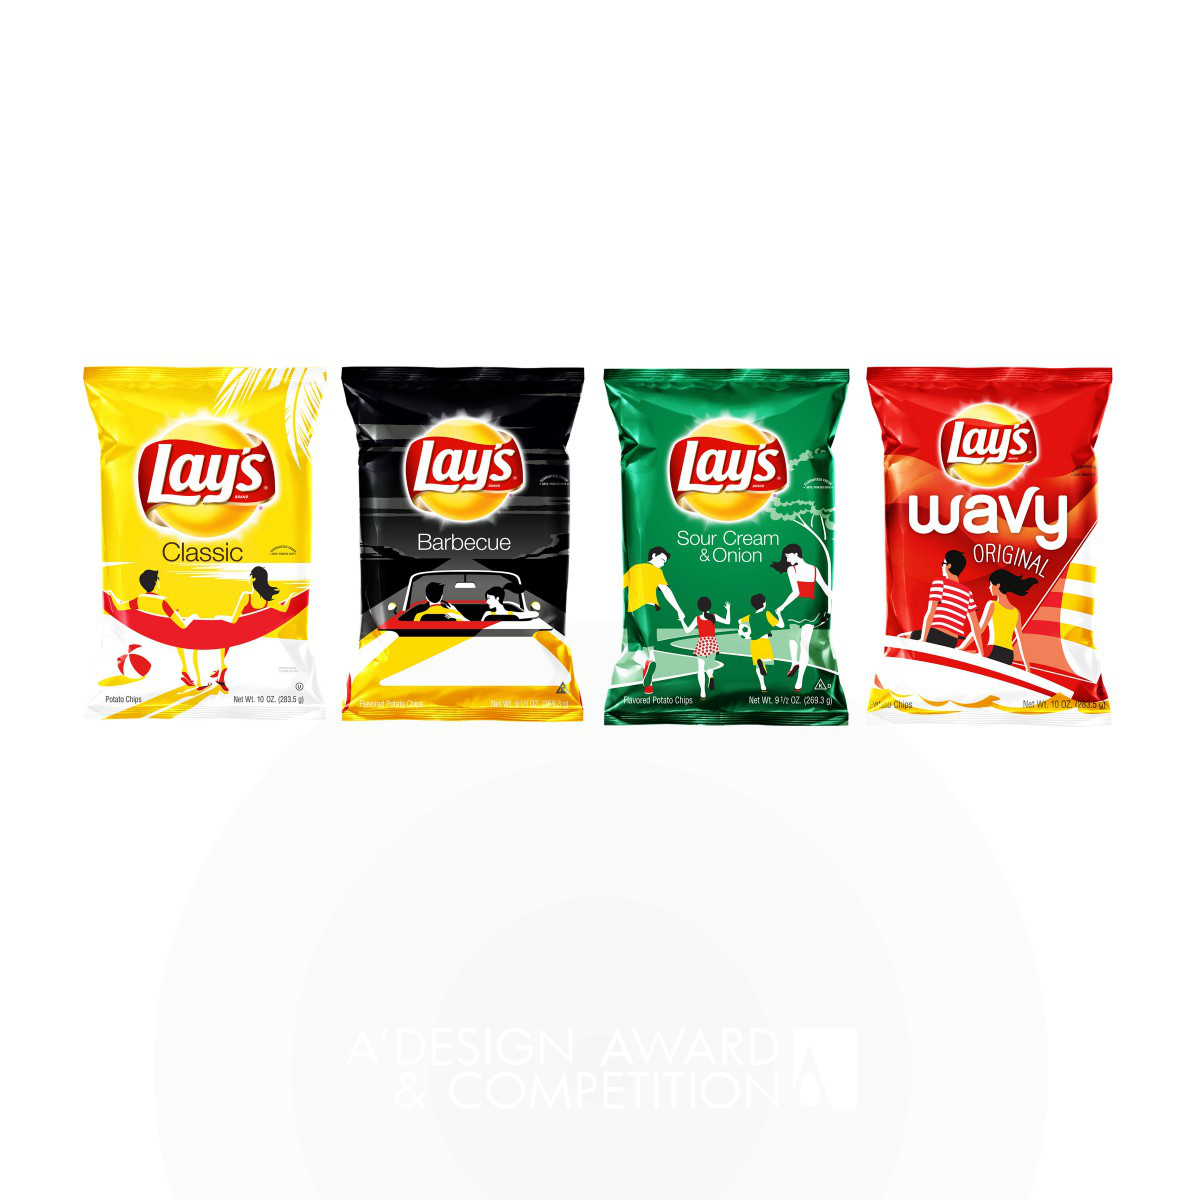 Lay's Summer Days Ltd Edition Packaging Food Packaging by PepsiCo Design and Innovation